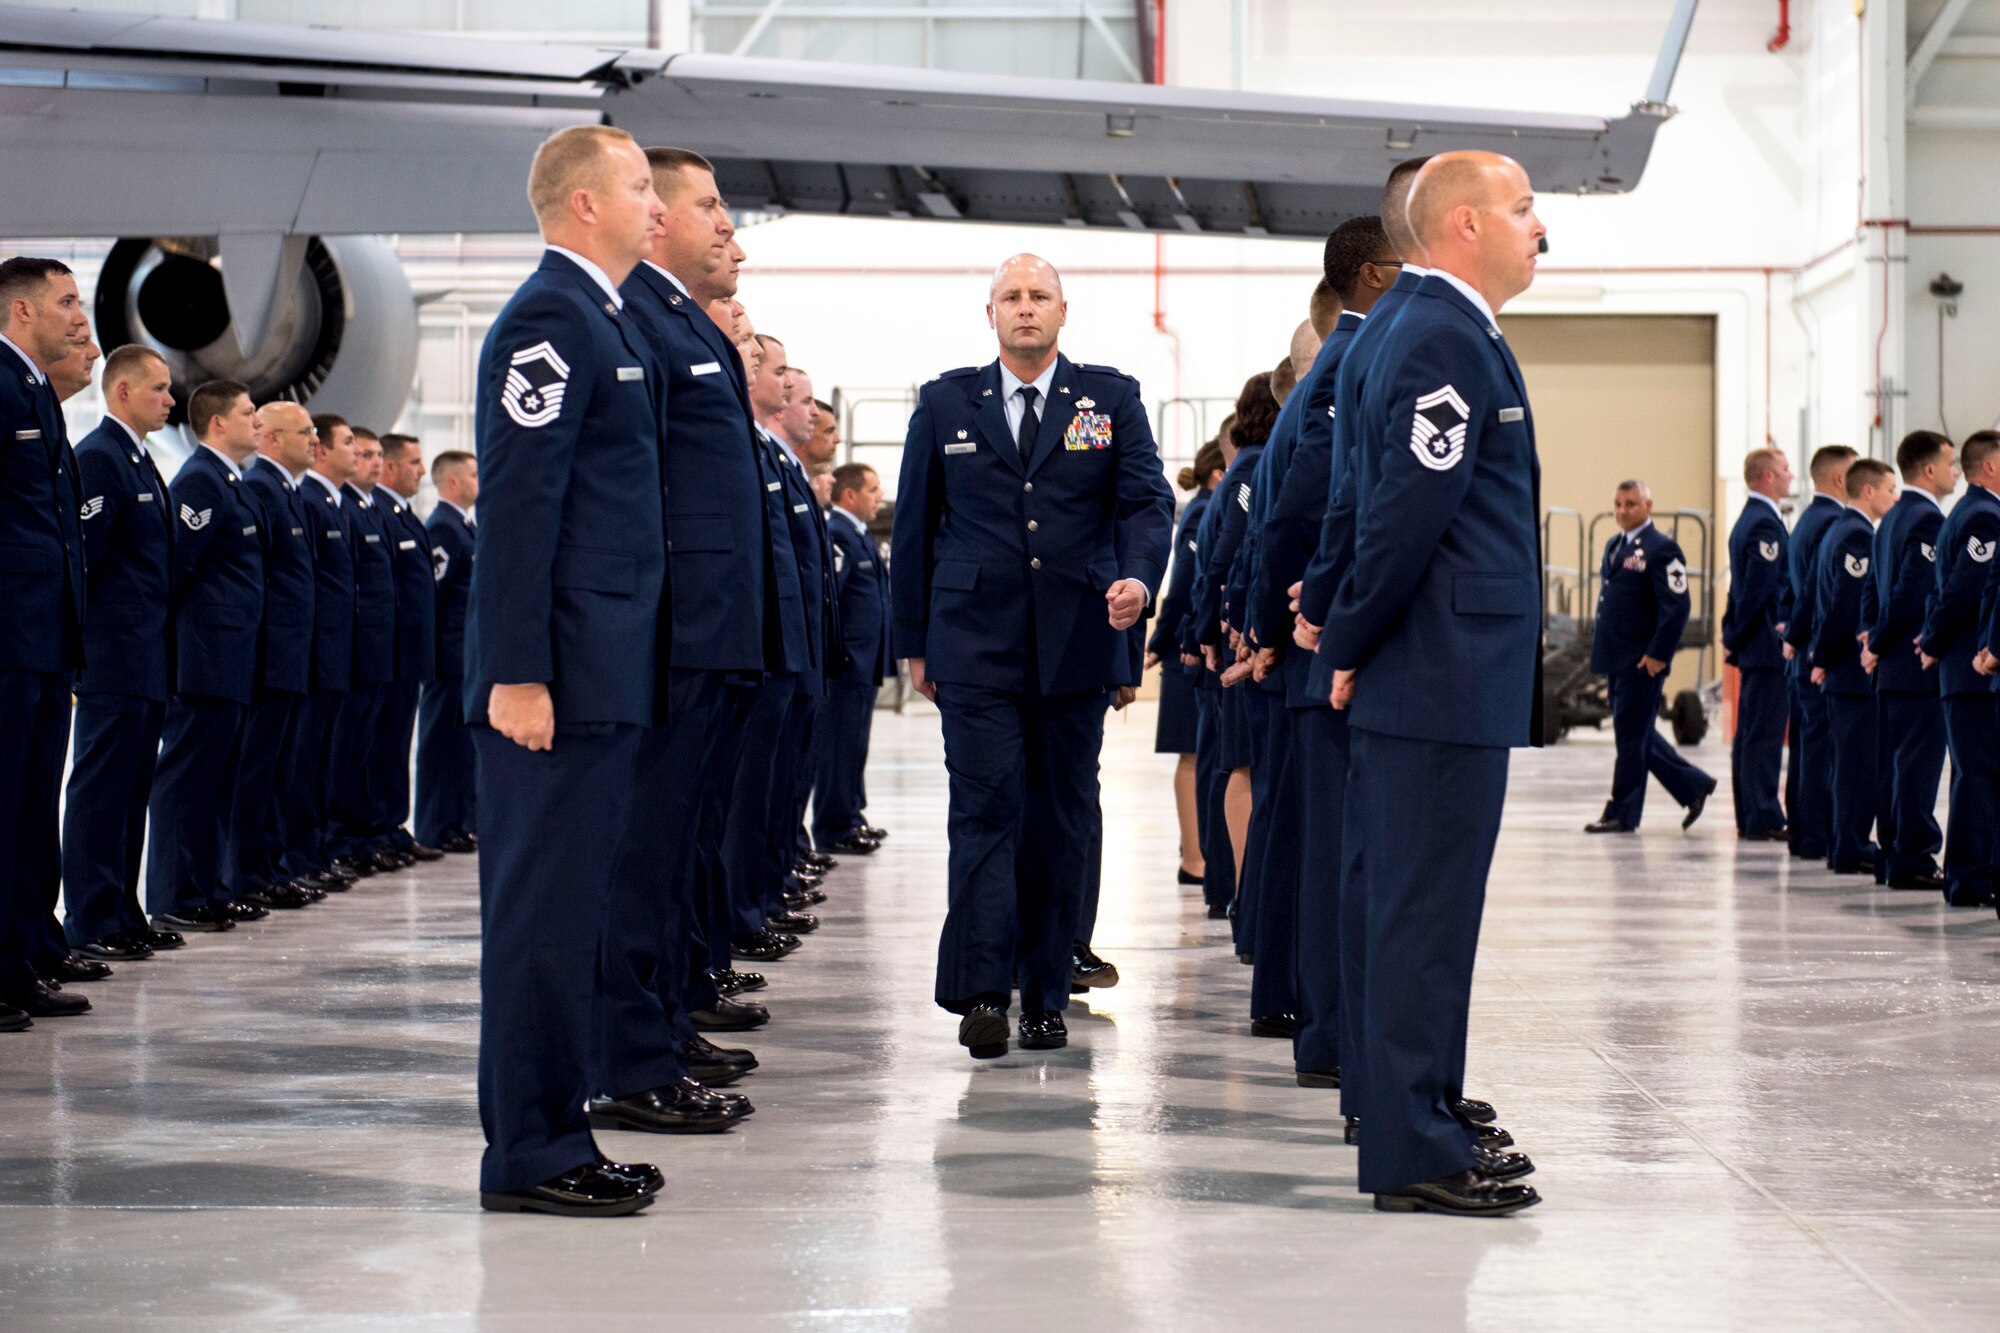 Lt. Col. Jason L. Harris, the167th Aircraft Maintenance Squadron Commander, walks between Airmen during an open ranks blues inspection in an aircraft hangar, June 6, 2019. During the inspection, ribbons, stripes and accouterments were checked to ensure all Airmen are meeting Air Force uniform standards.  (U.S. Air National Guard photo by Tech. Sgt. Jodie Witmer)